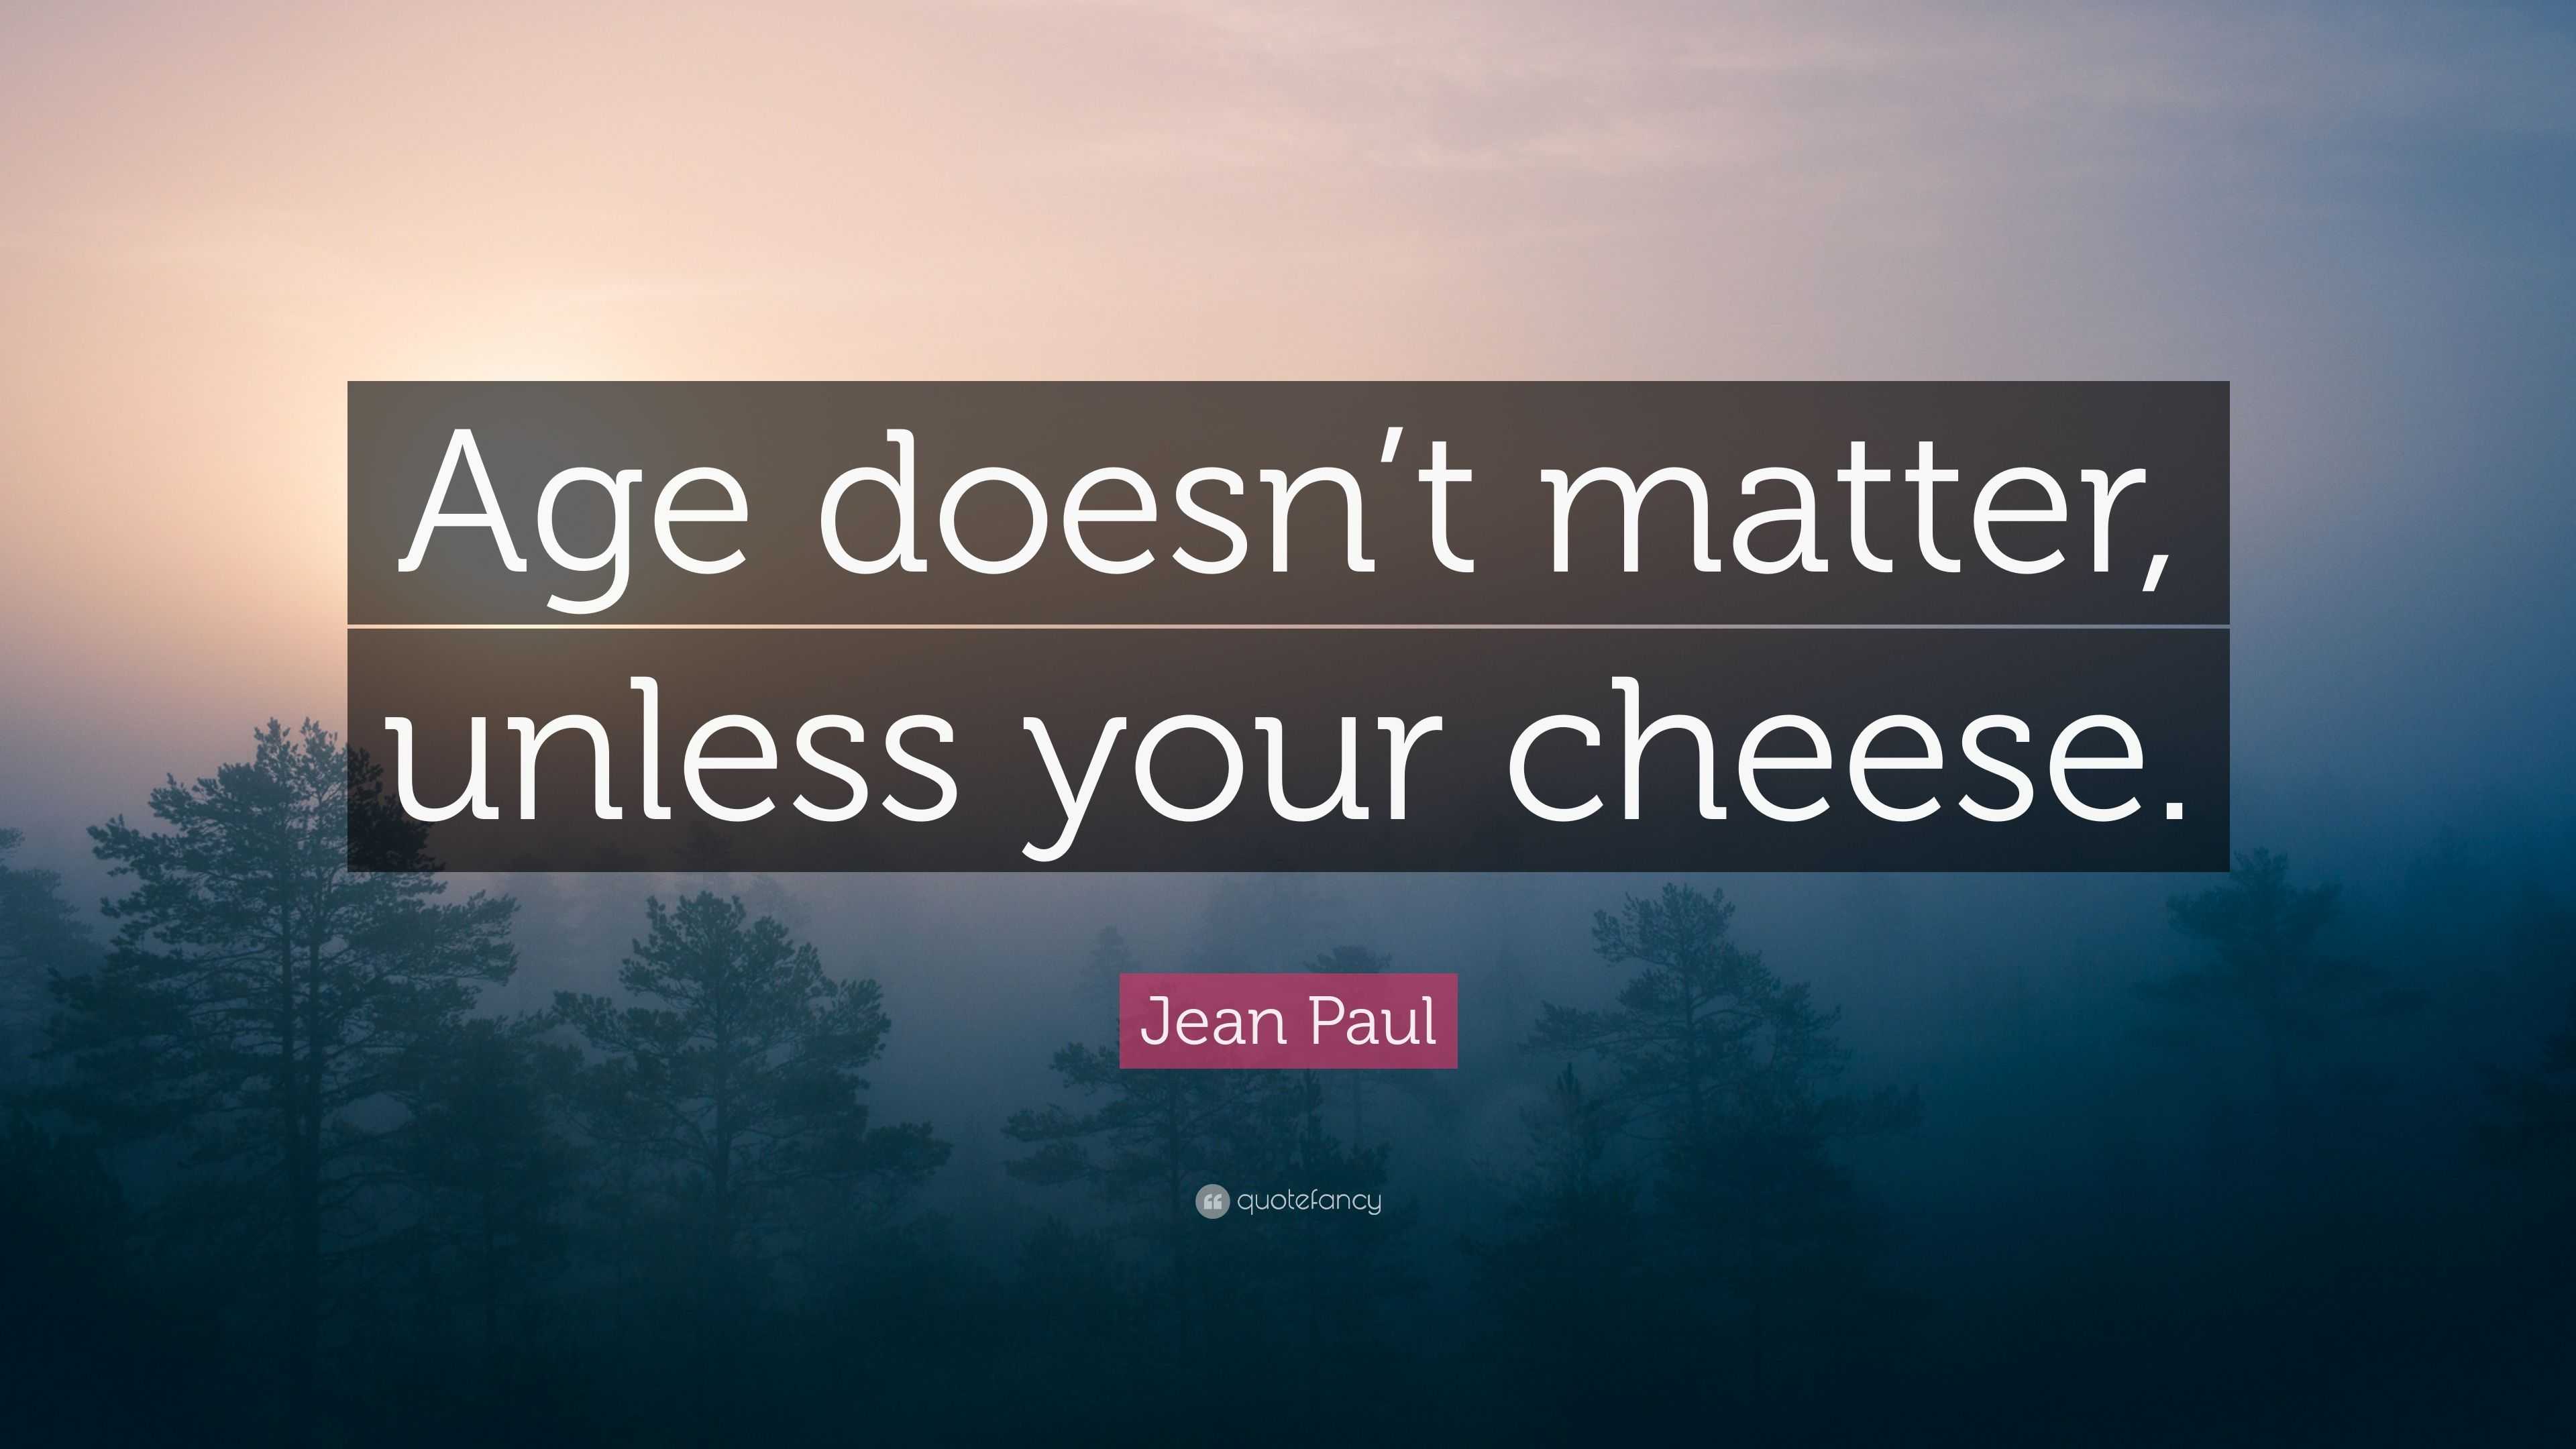 Jean Paul Quote “Age doesn’t matter, unless your cheese.”